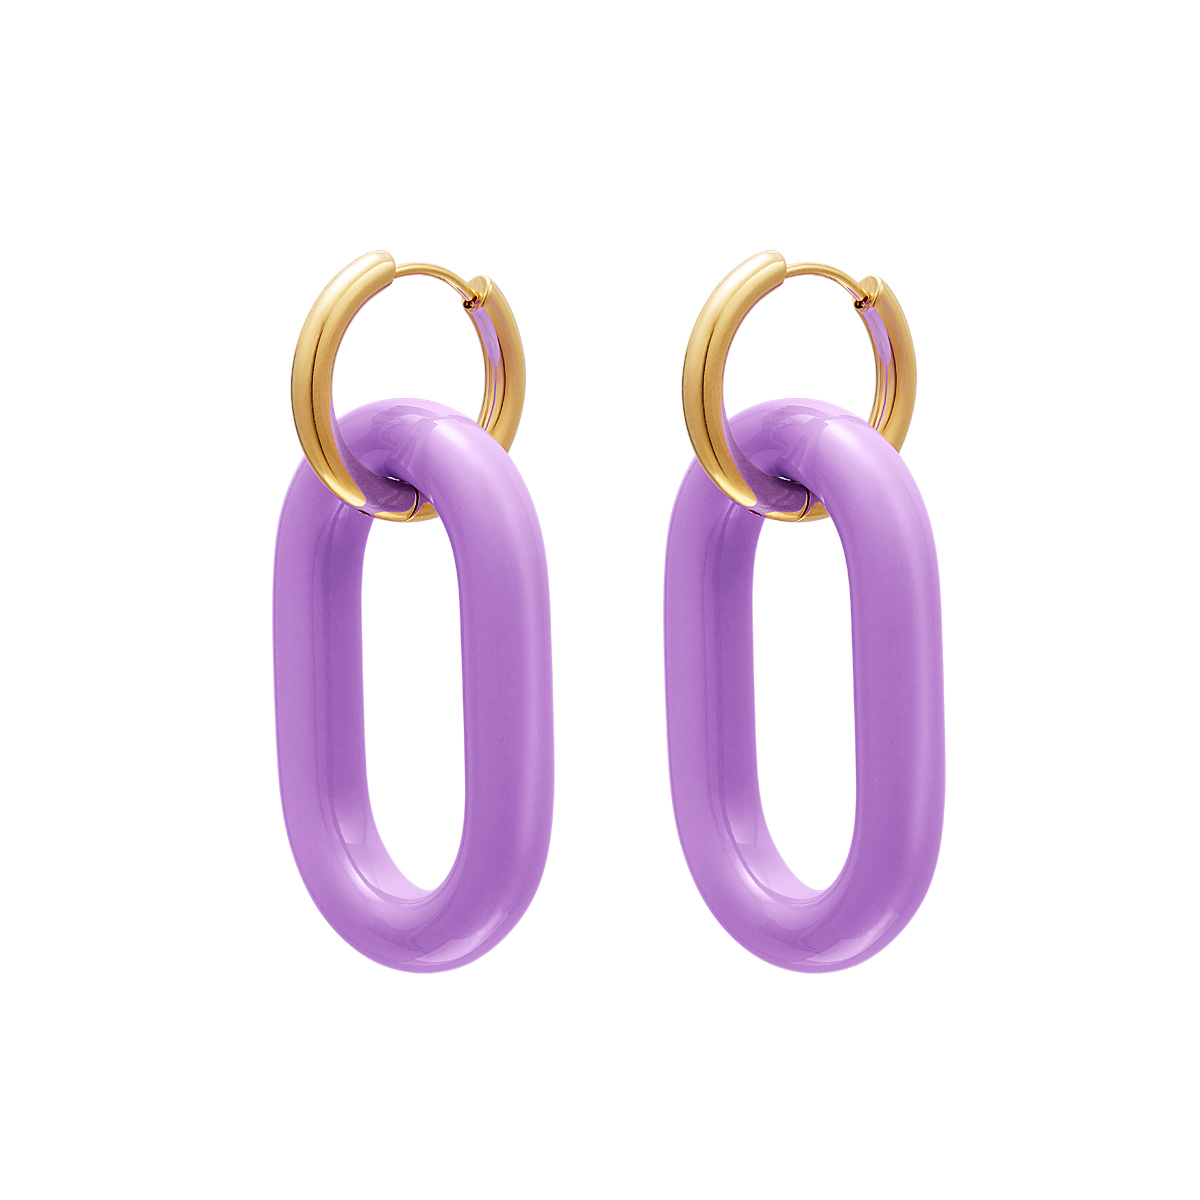 Colourful anchor link earrings - #summergirls collection